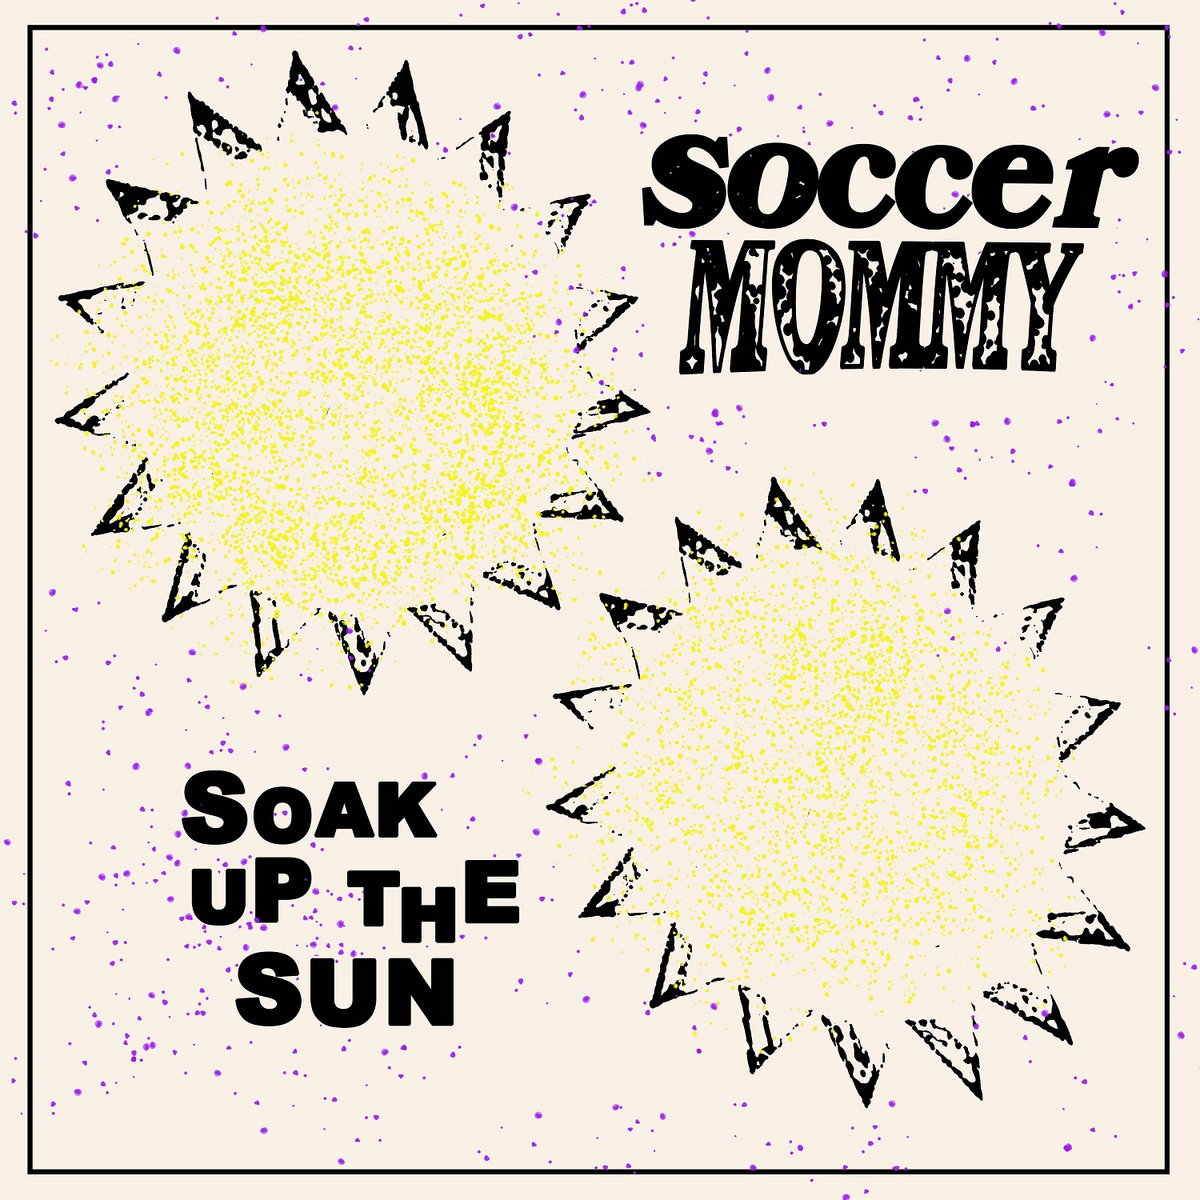 Soccer Mommy Drops New Single: 'Soak Up The Sun' – A Breath of Summer Bliss